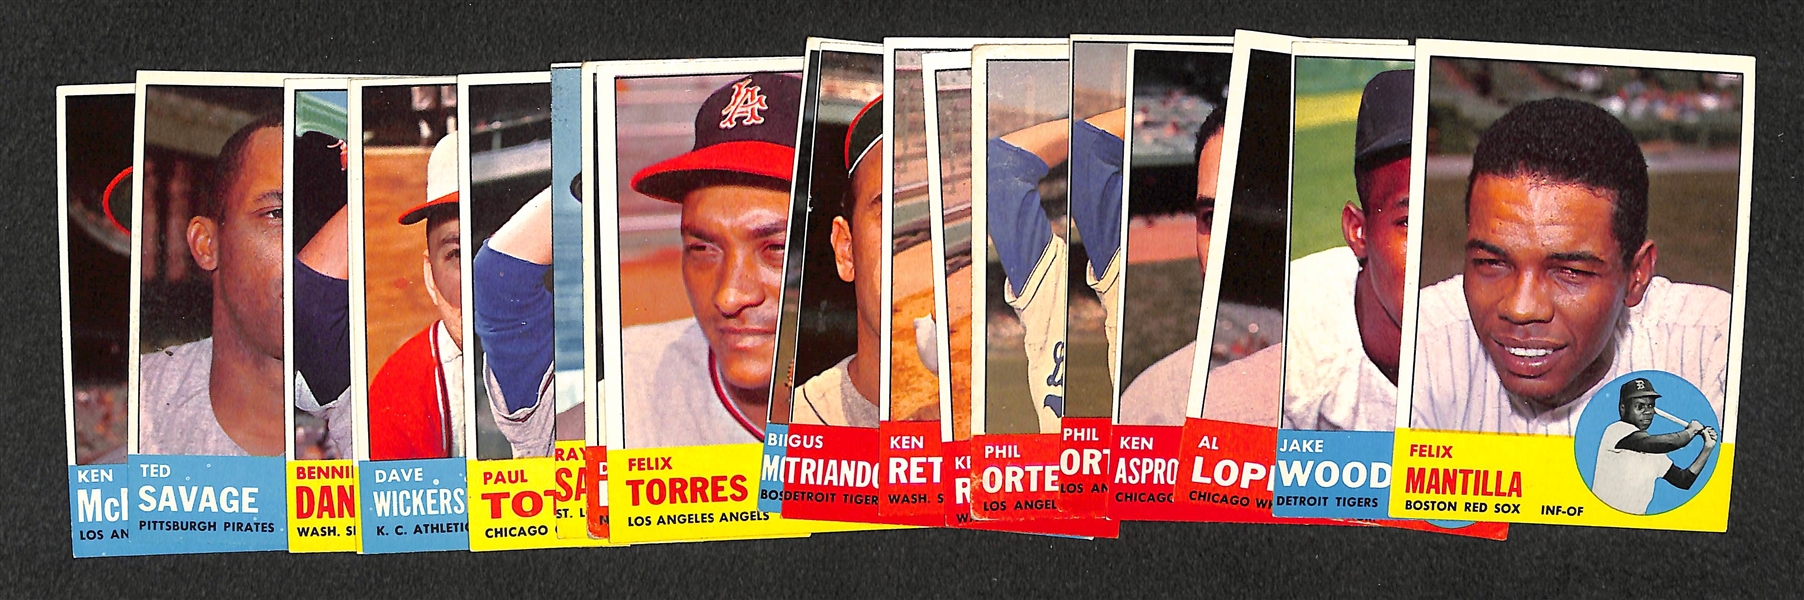 Lot of 400+ 1963 Topps Baseball Cards w. Billy Williams & 19 Mid-Hi #s